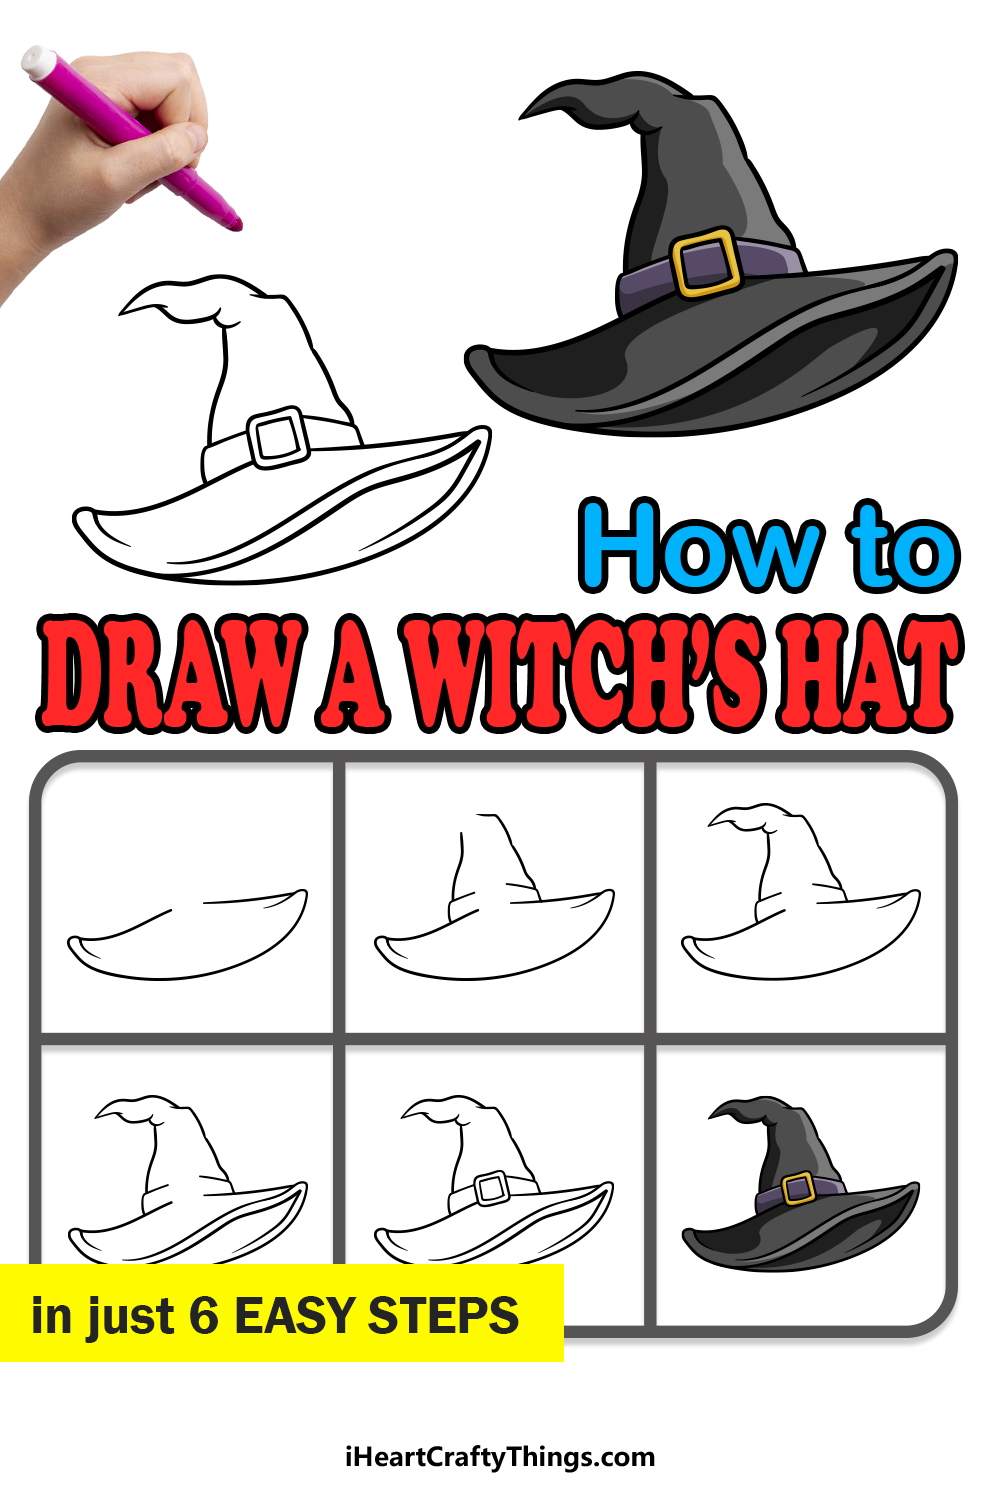 how to draw a witch hat in 6 easy steps